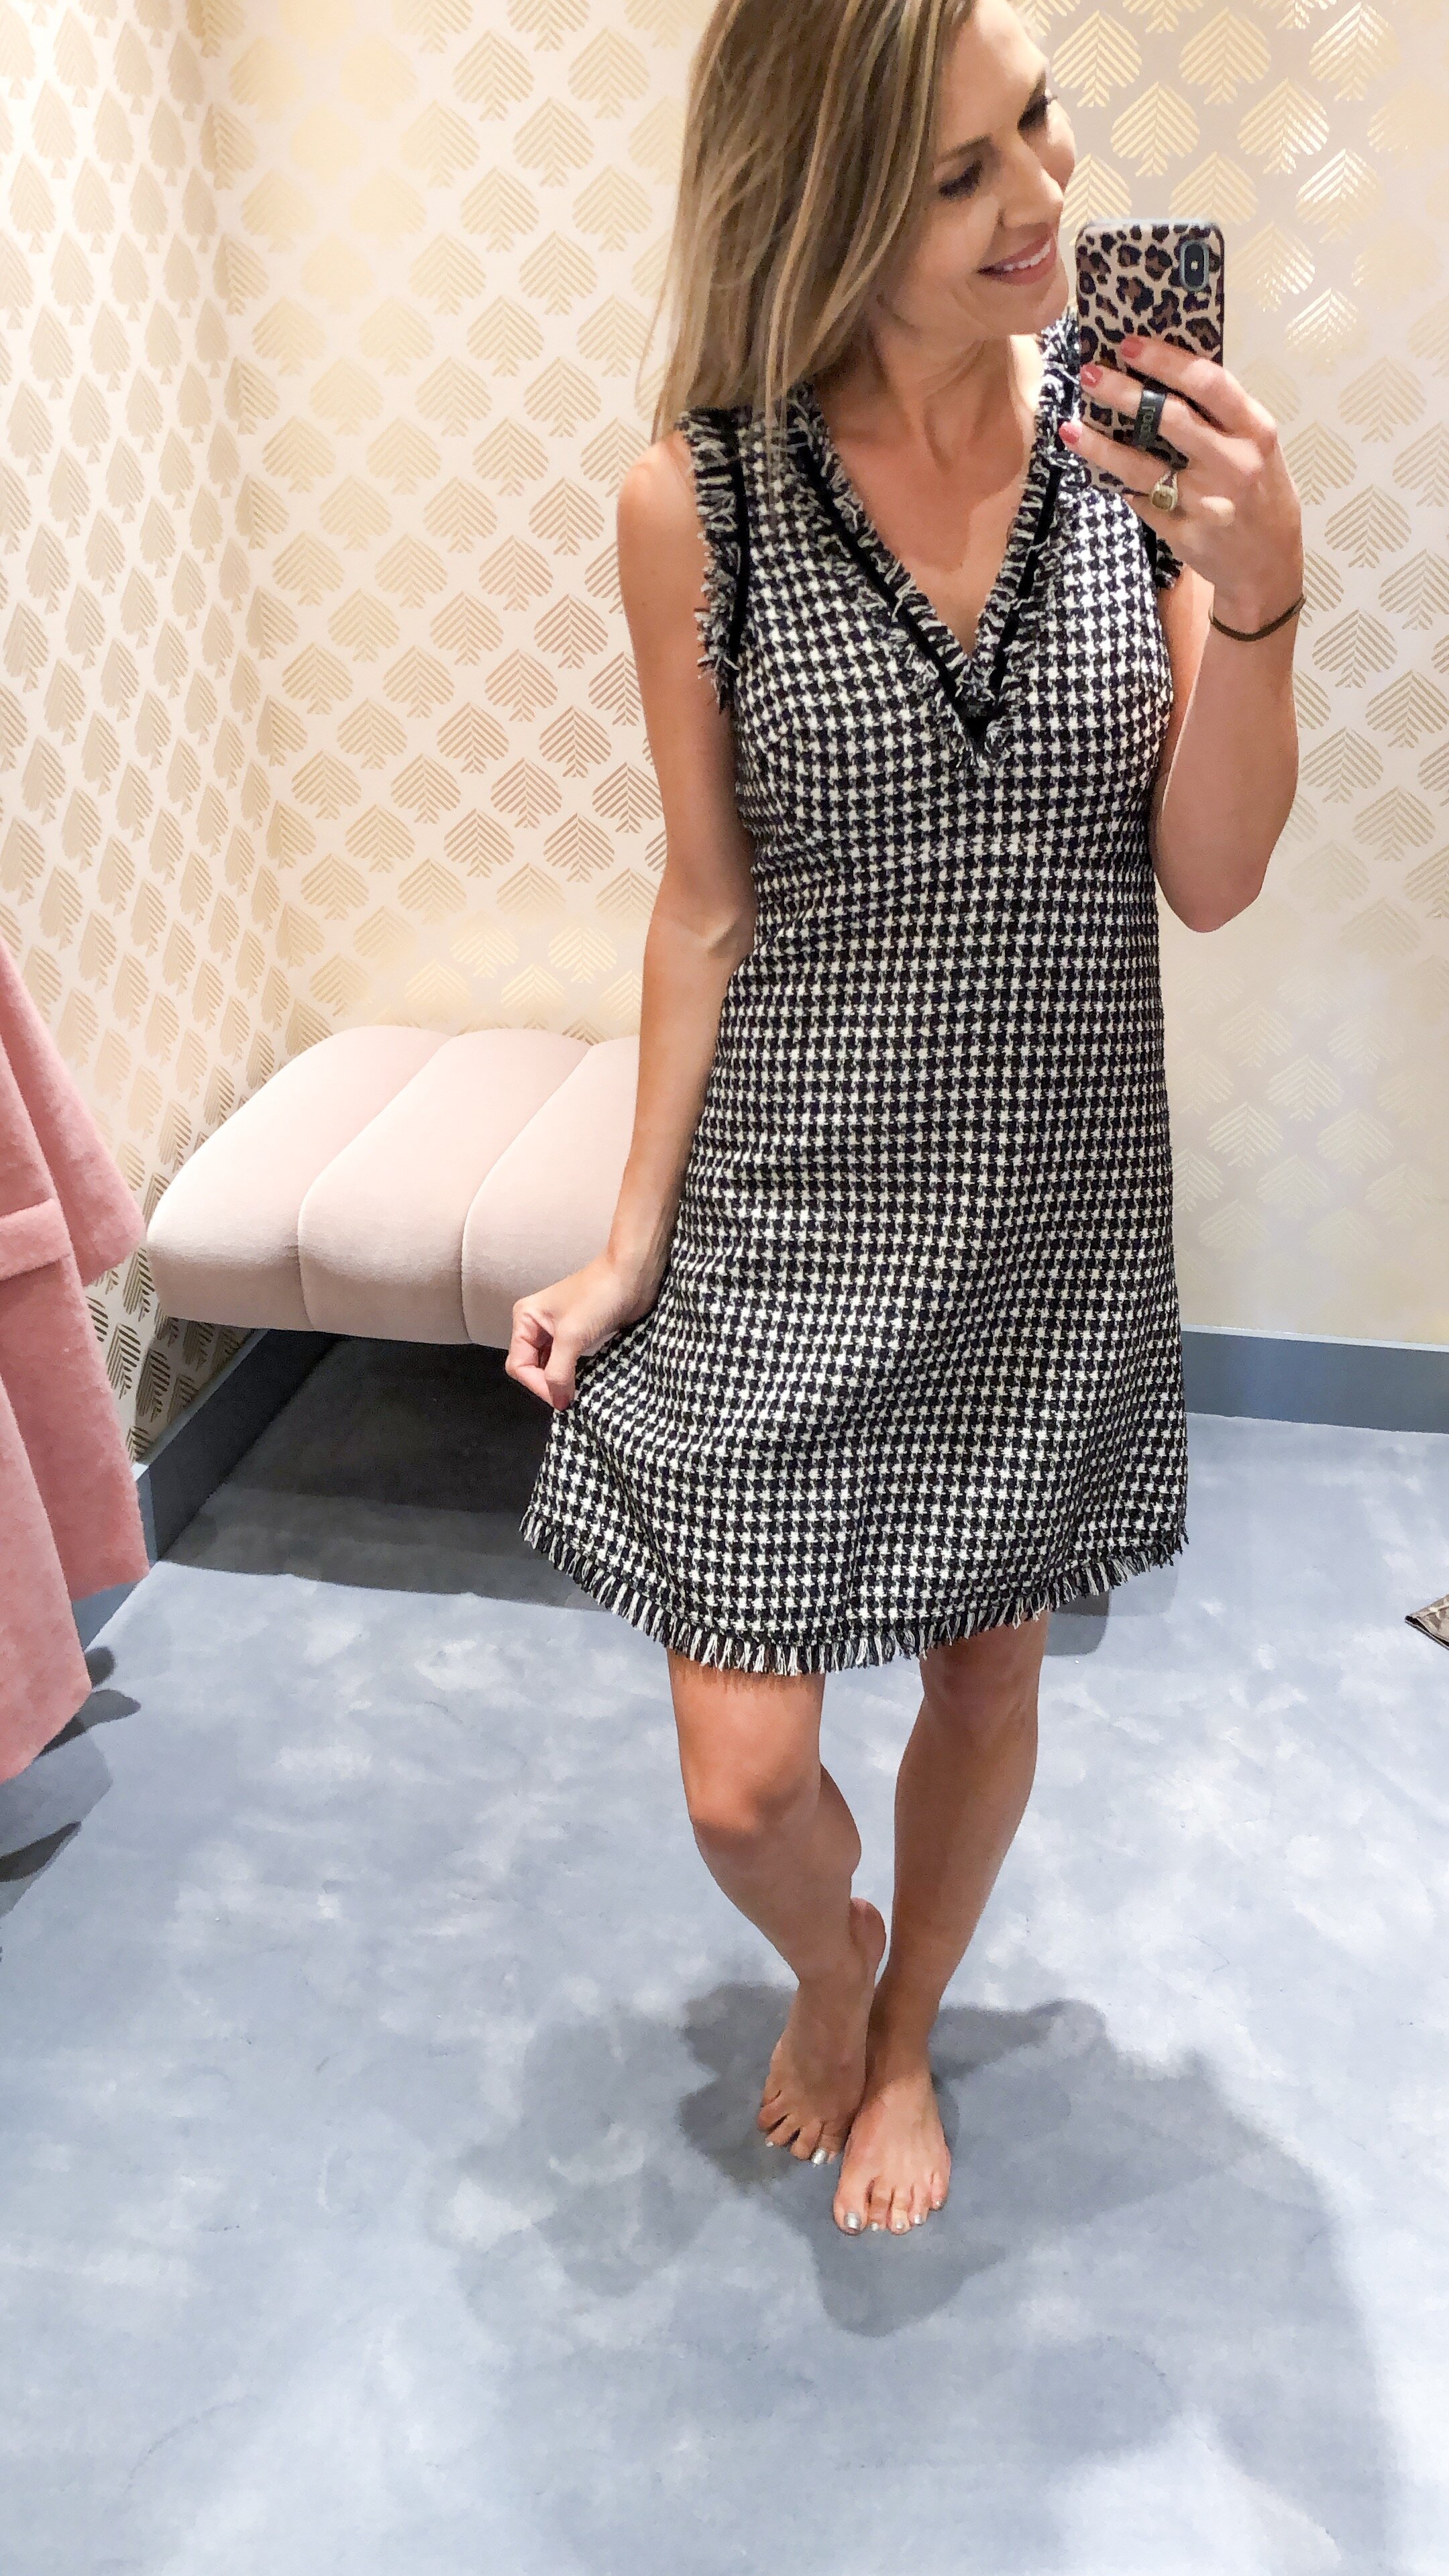 Kate Spade Outlet Tour — Fashion Blogger | Lady and Red